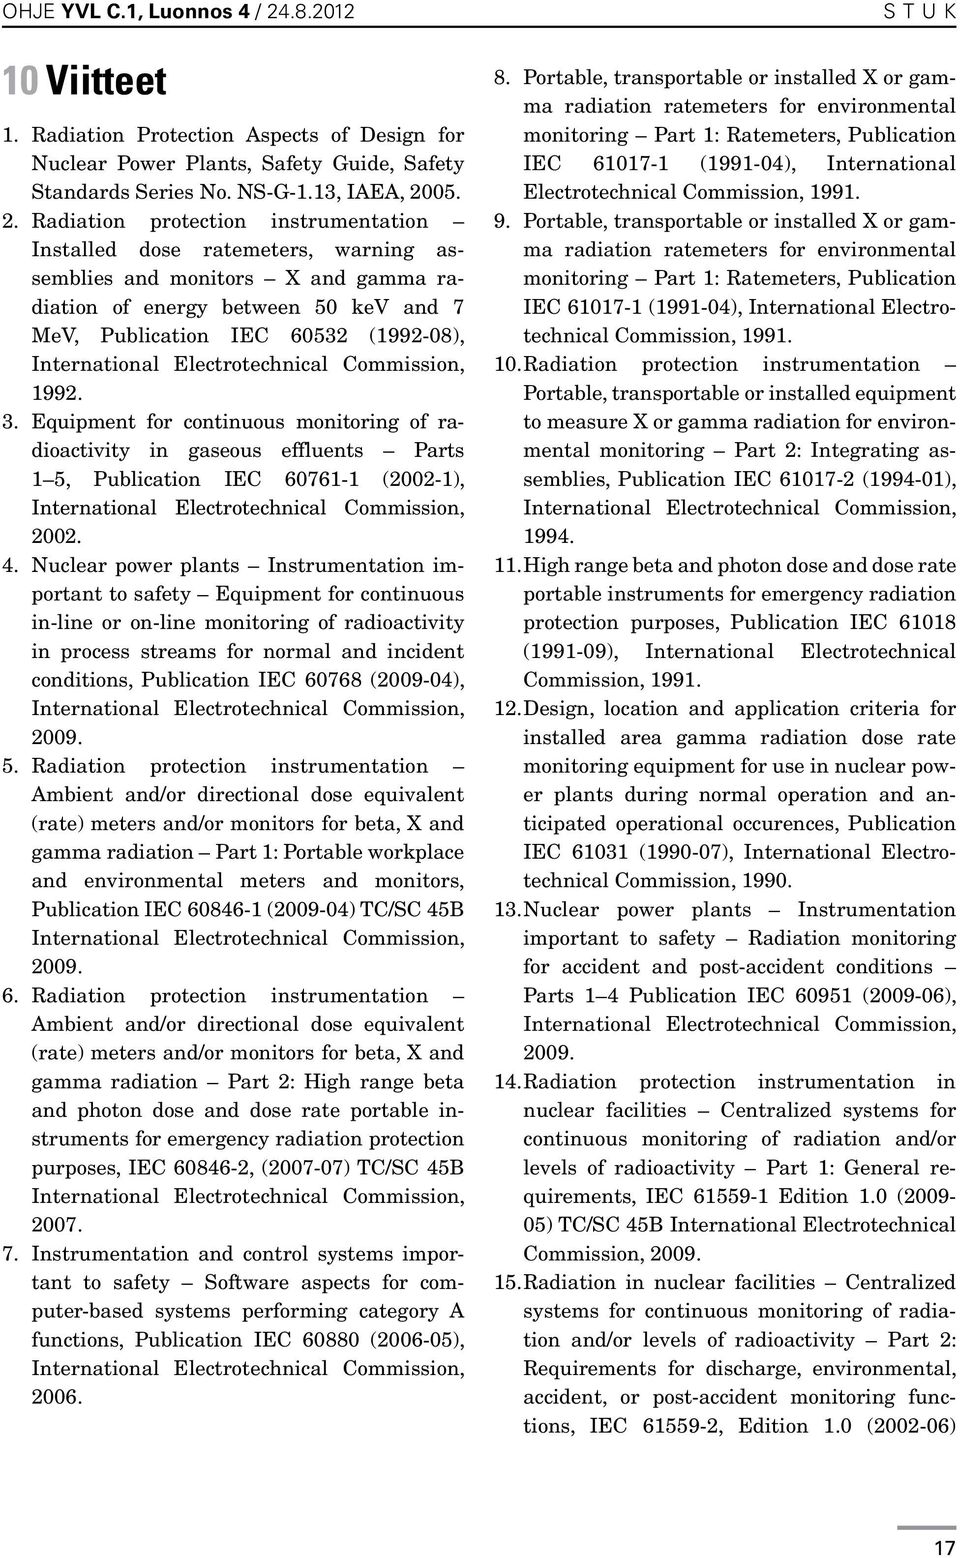 05. 2. Radiation protection instrumentation Installed dose ratemeters, warning assemblies and monitors X and gamma radiation of energy between 50 kev and 7 MeV, Publication IEC 60532 (1992-08), 1992.